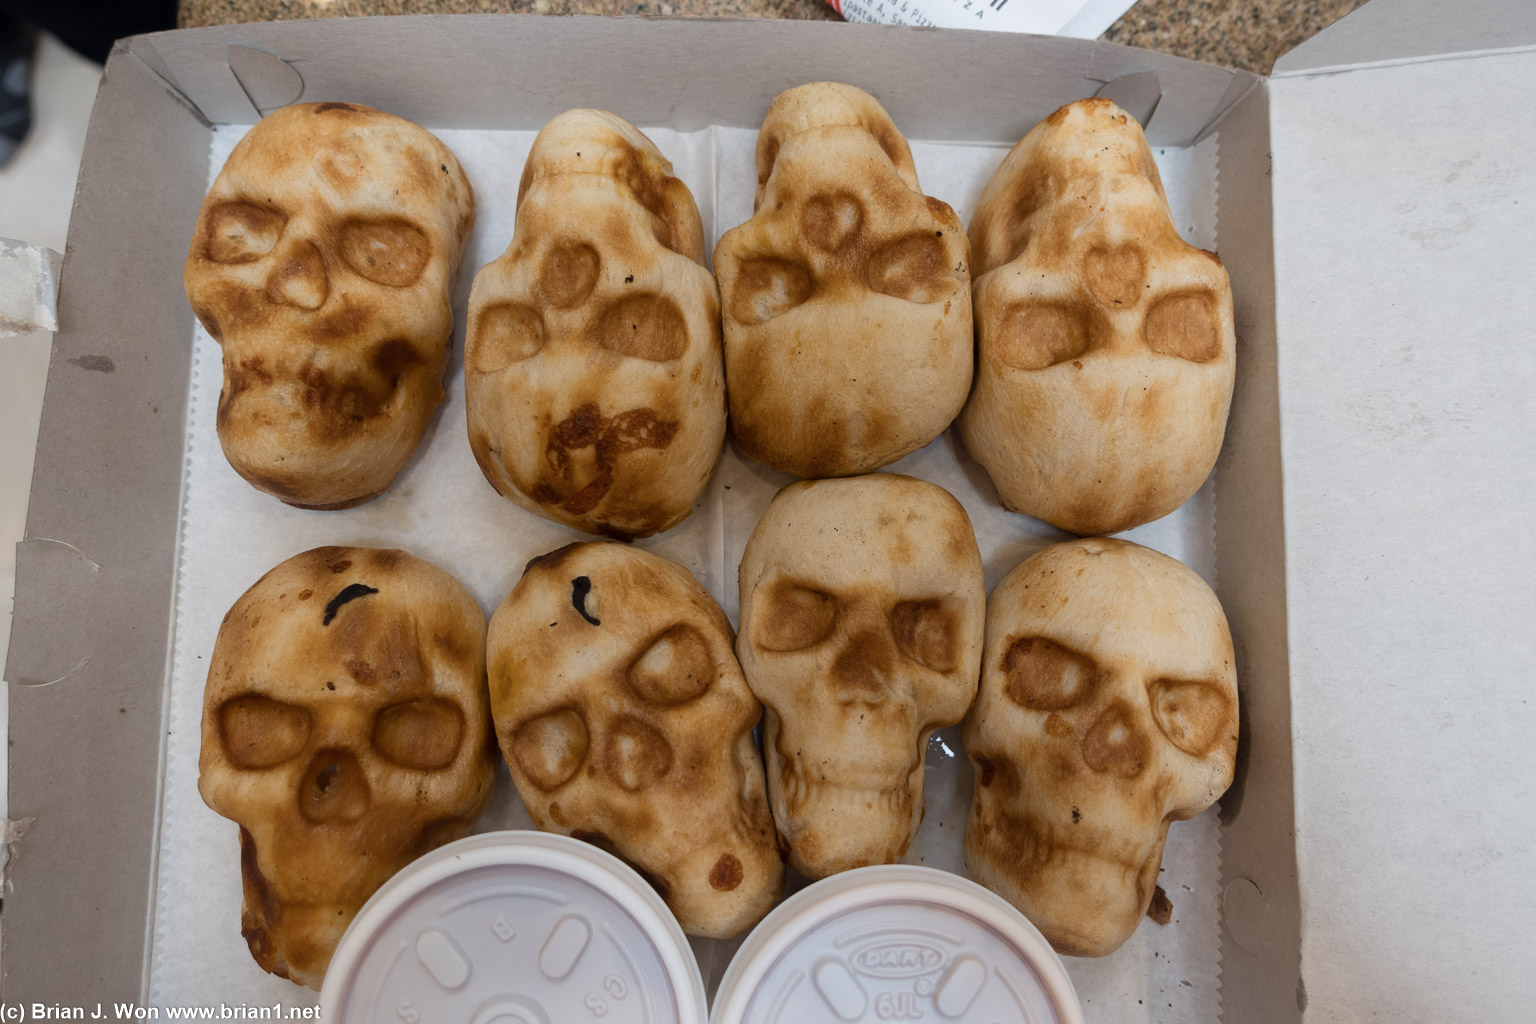 Mara brought pizza skulls. They were good but very cheesy.